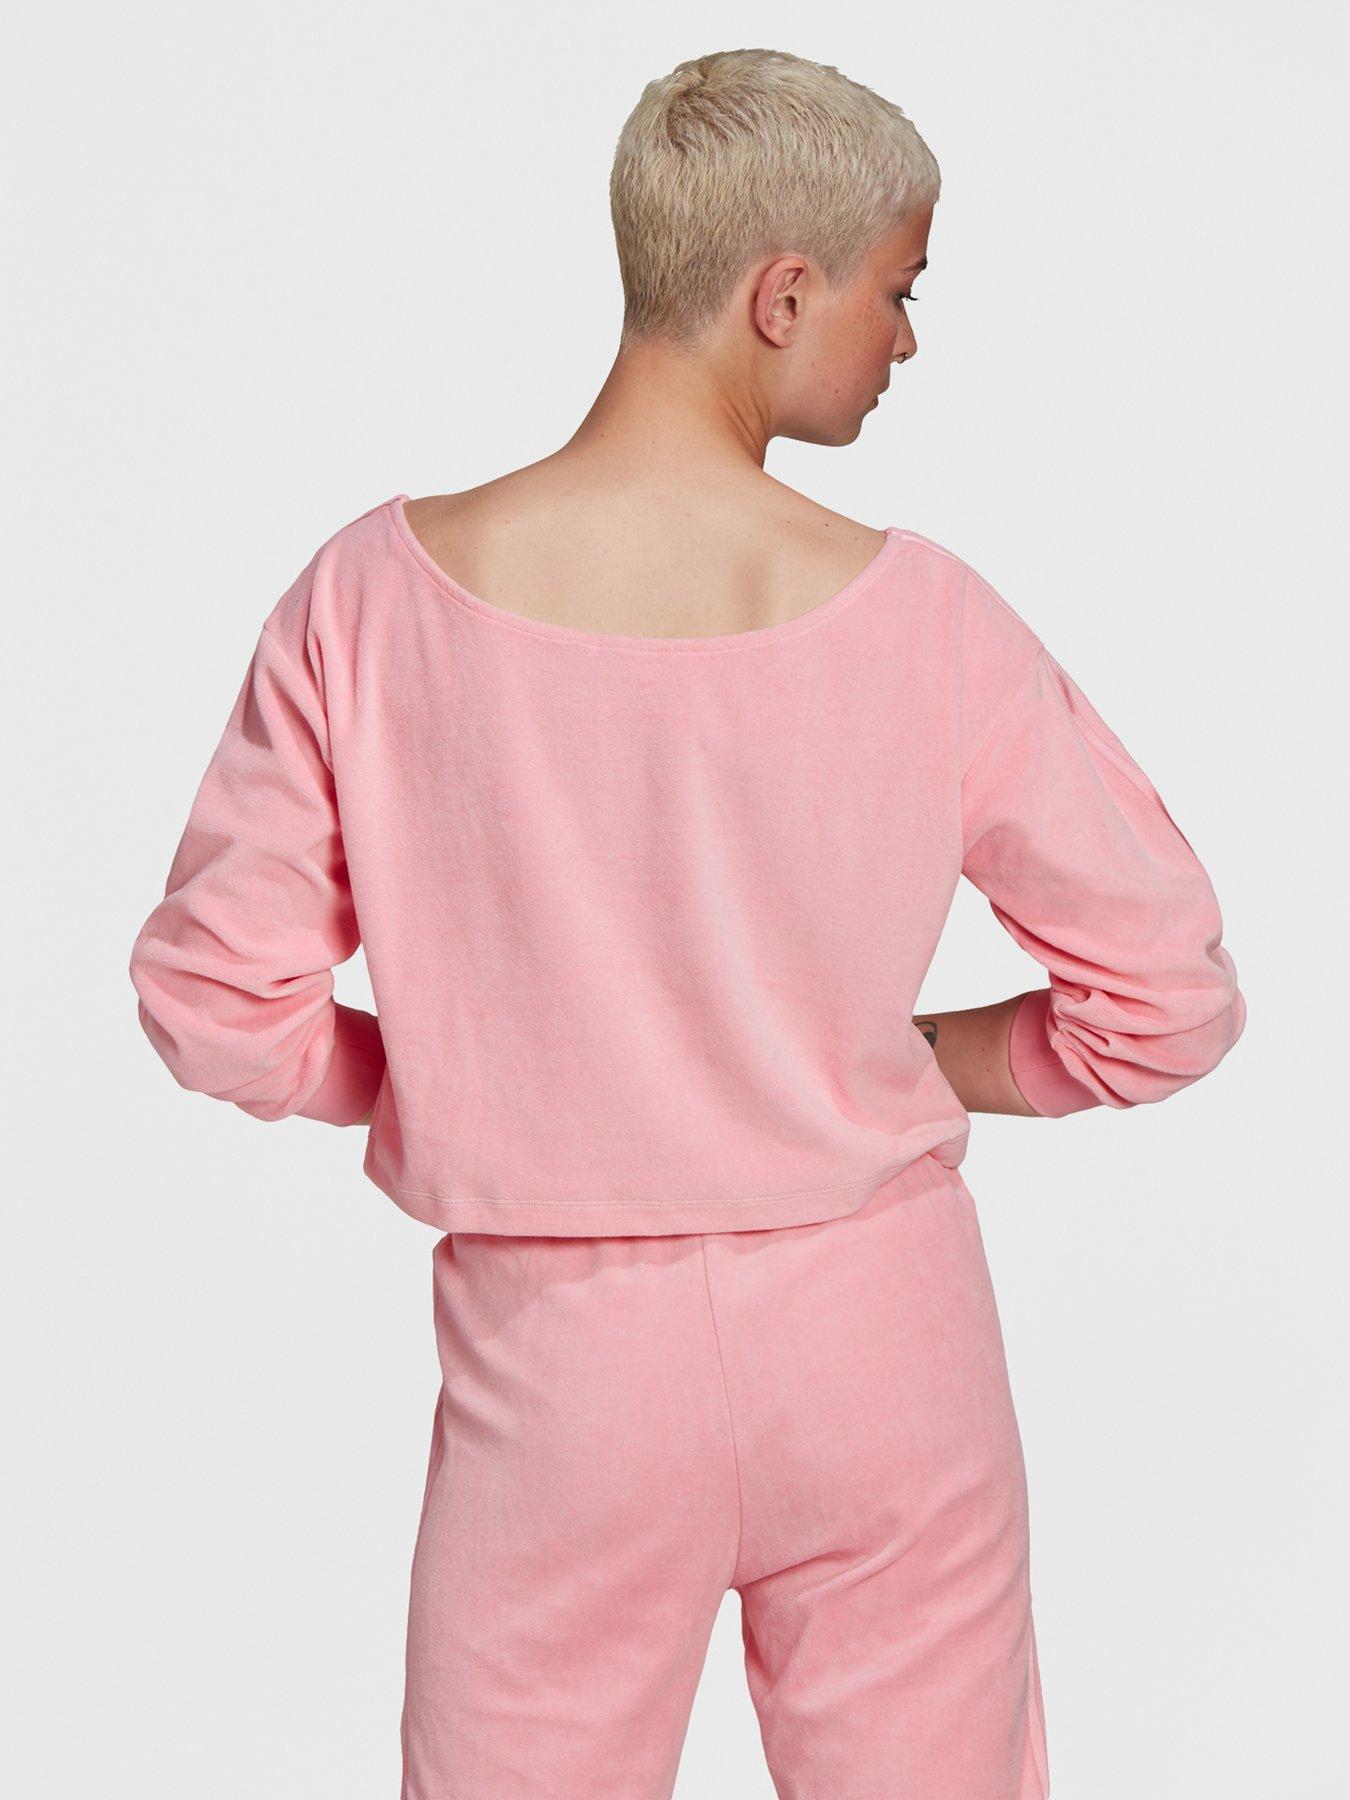 Hoodies & Sweatshirts Relaxed Risque Velour Off Shoulder Sweater - Light Pink